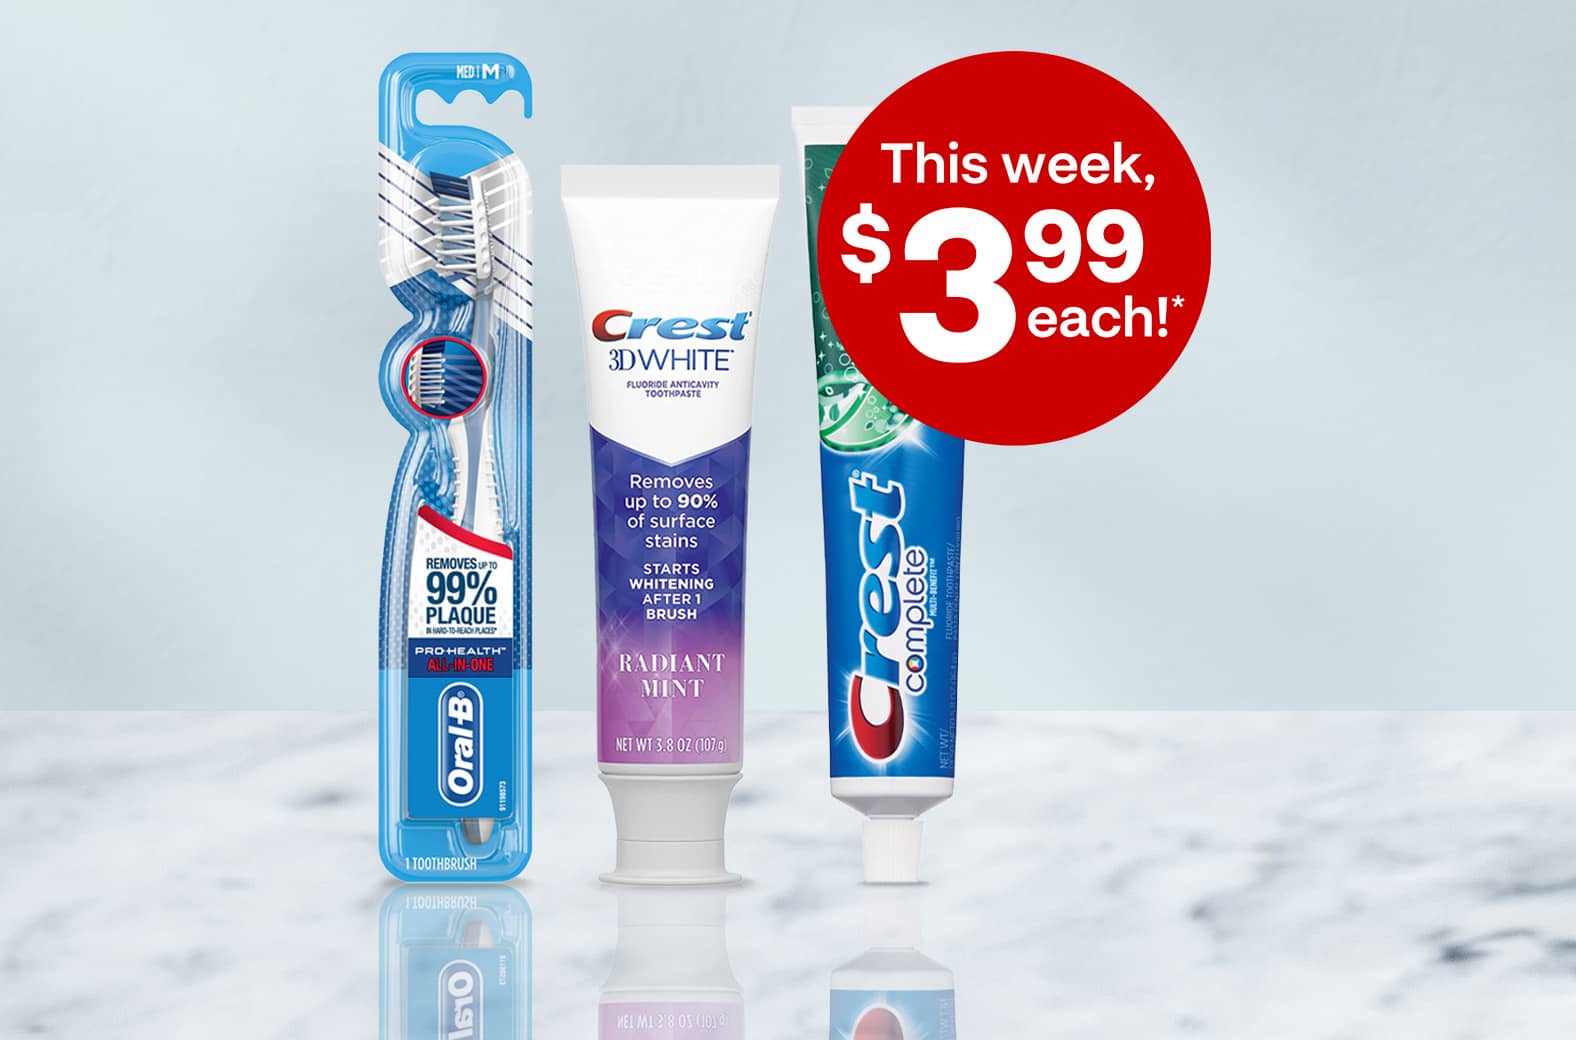 This week, $3.99 each on select Crest and Oral-B oral care products